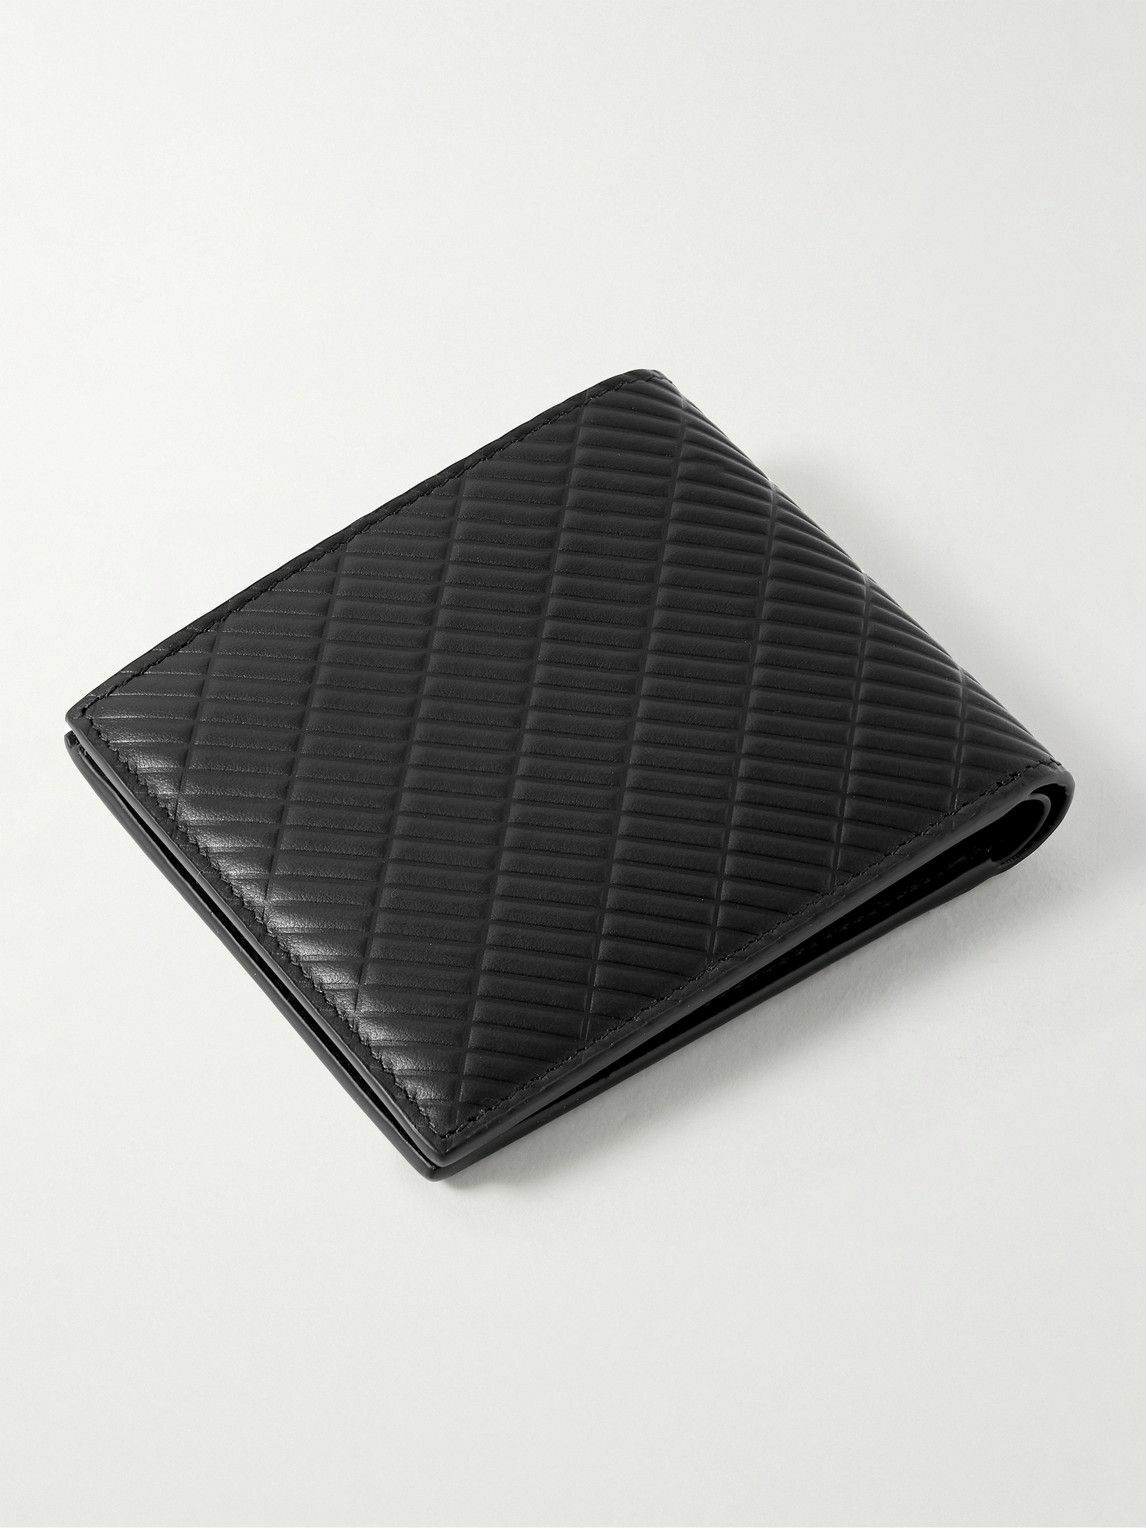 Dunhill - Contour Quilted Leather Billfold Wallet Dunhill